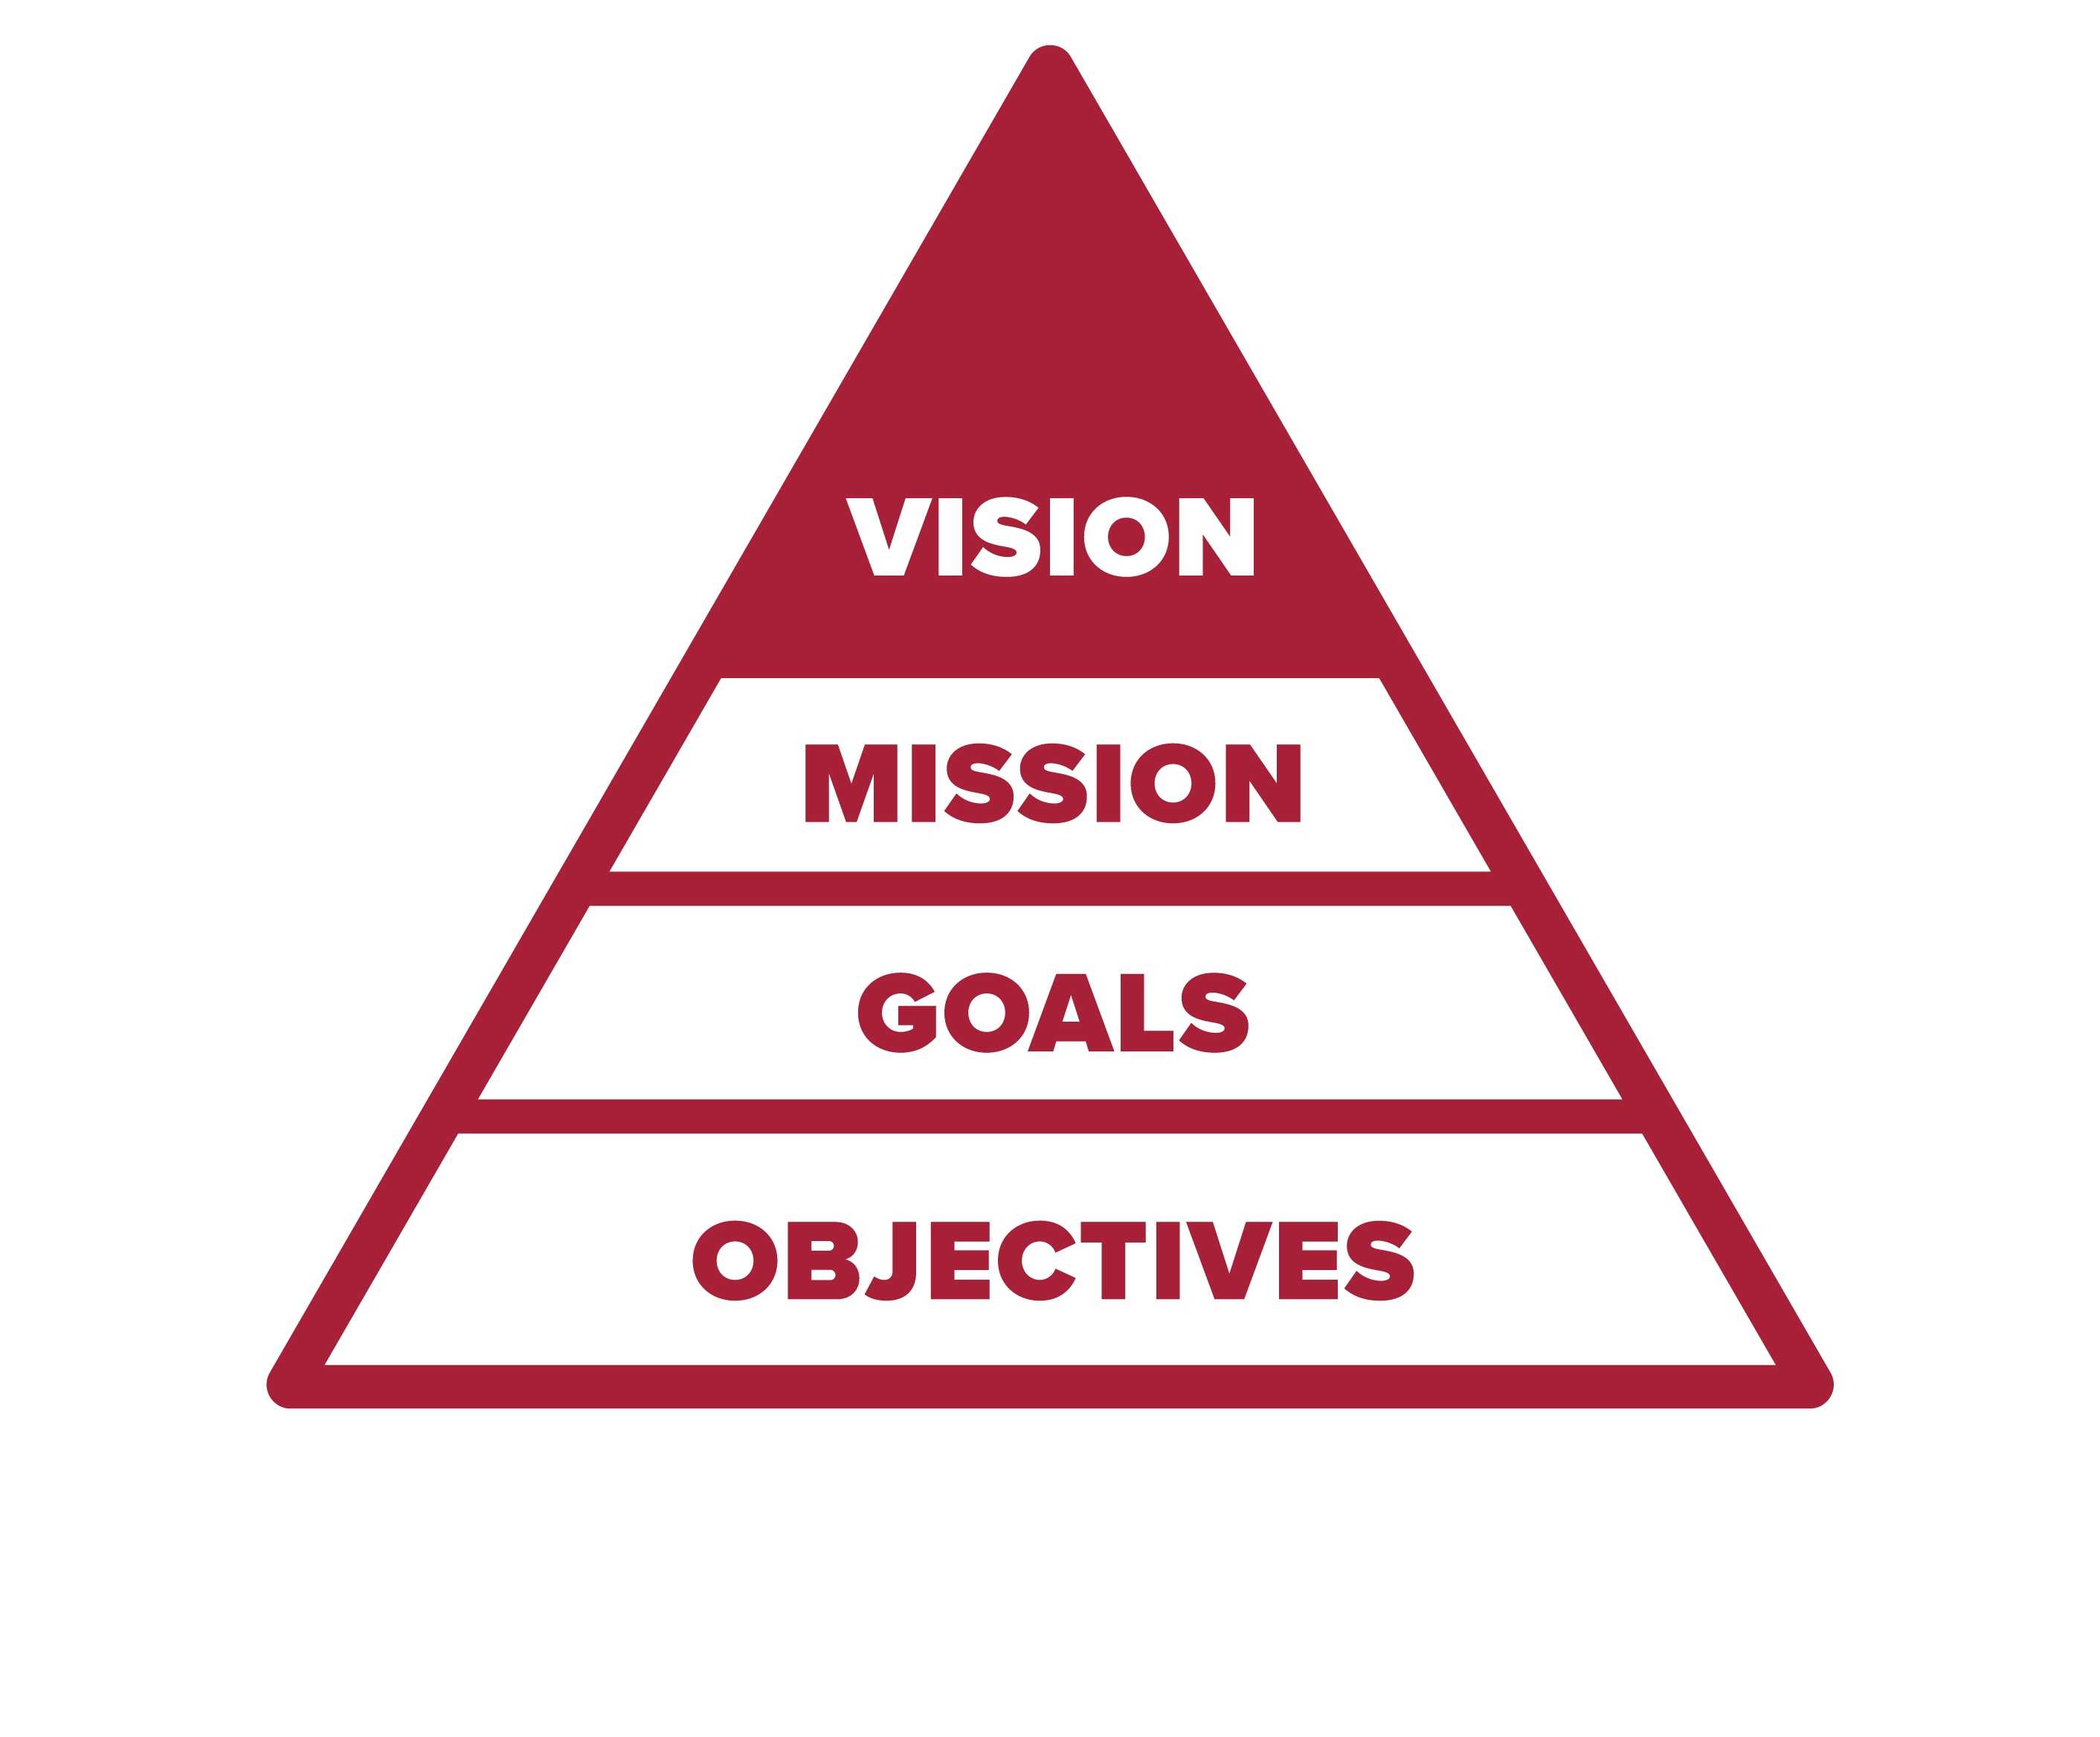 Image of icon for vision statement